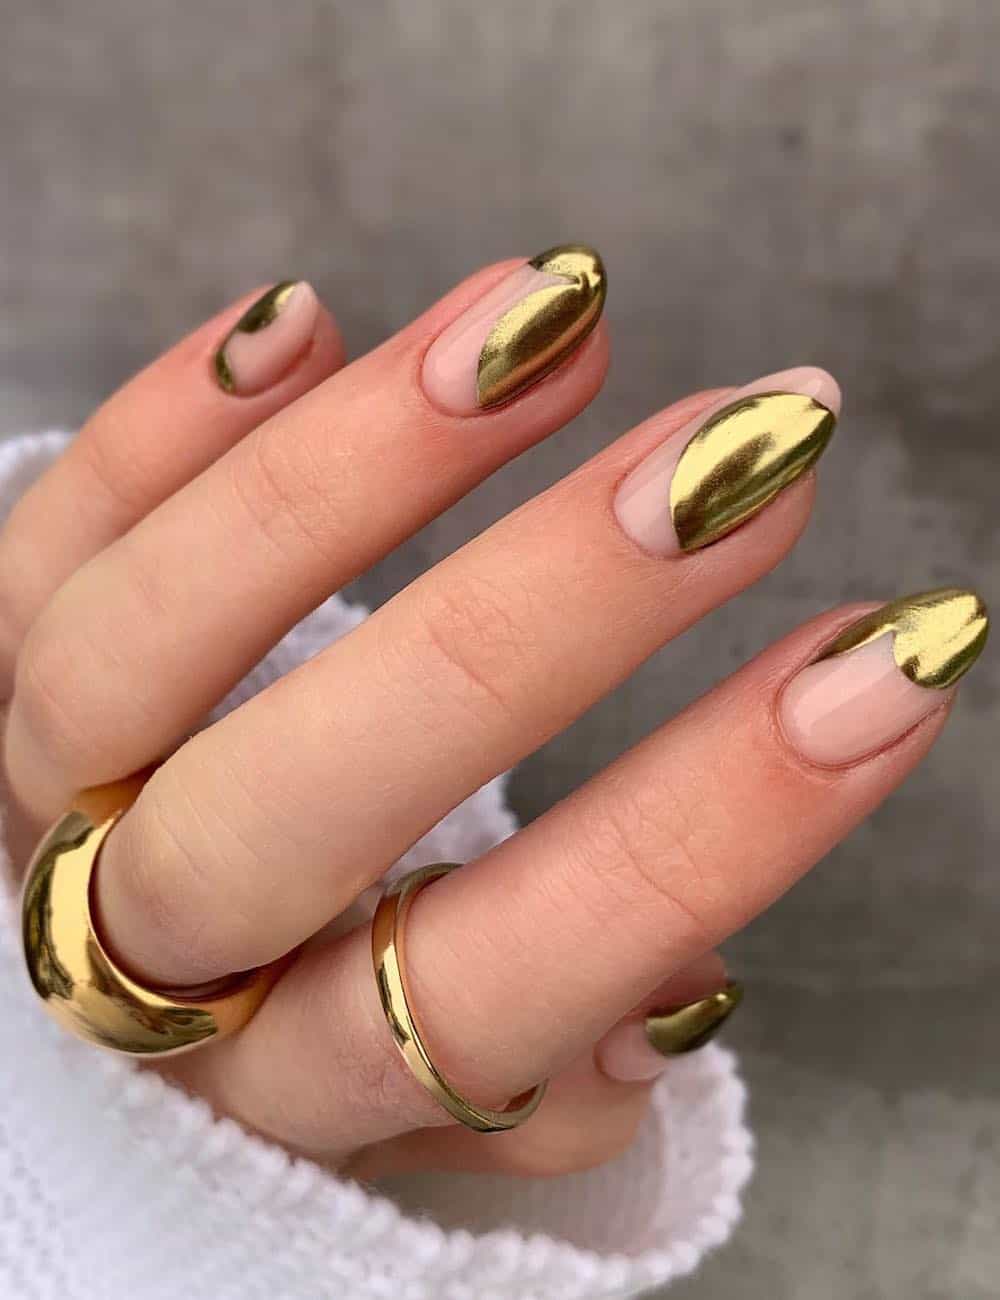 short round nude nails with molten gold accents